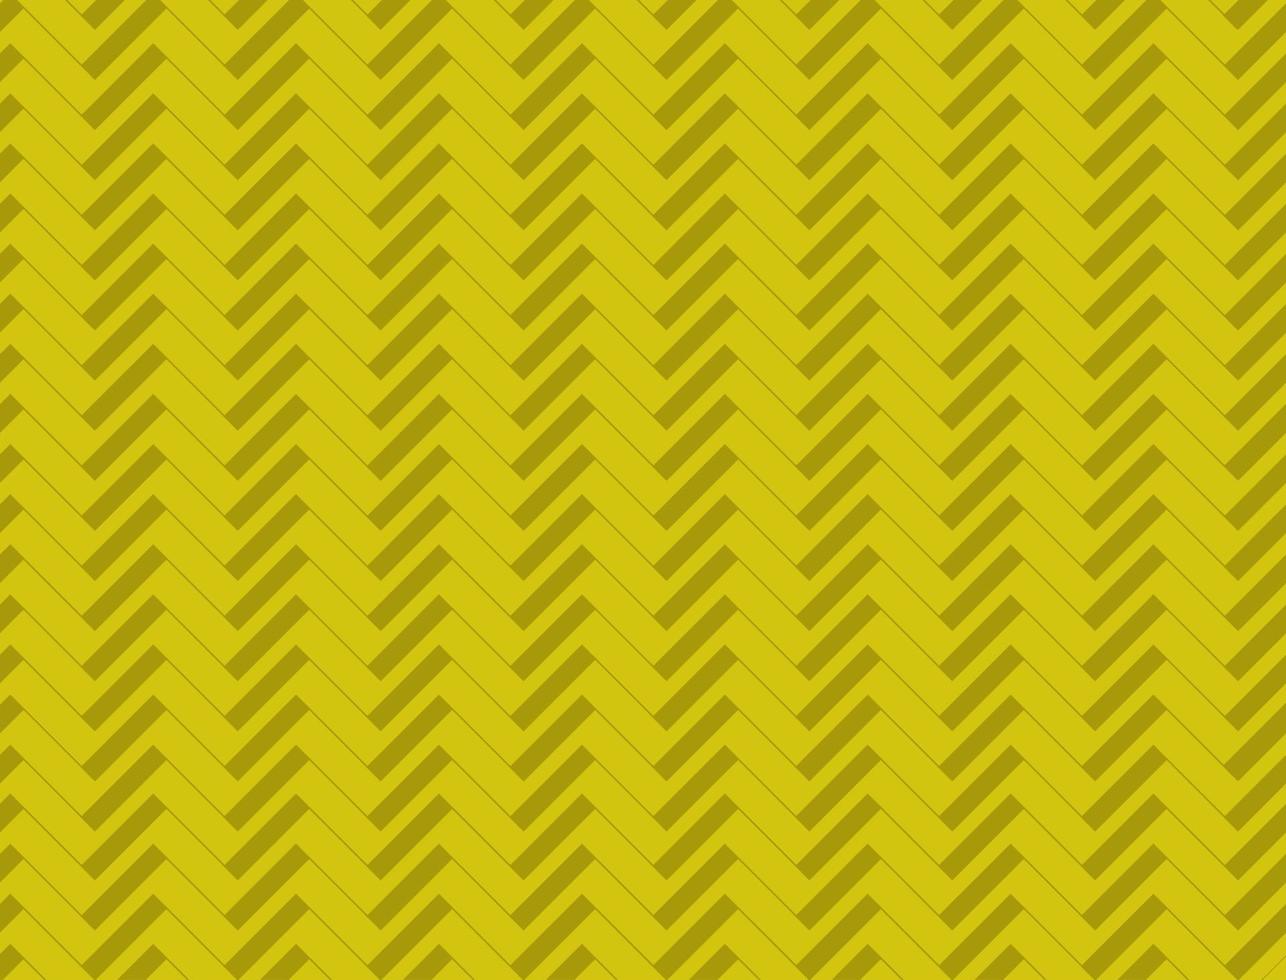 Abstract background in yellow color with striped pattern vector